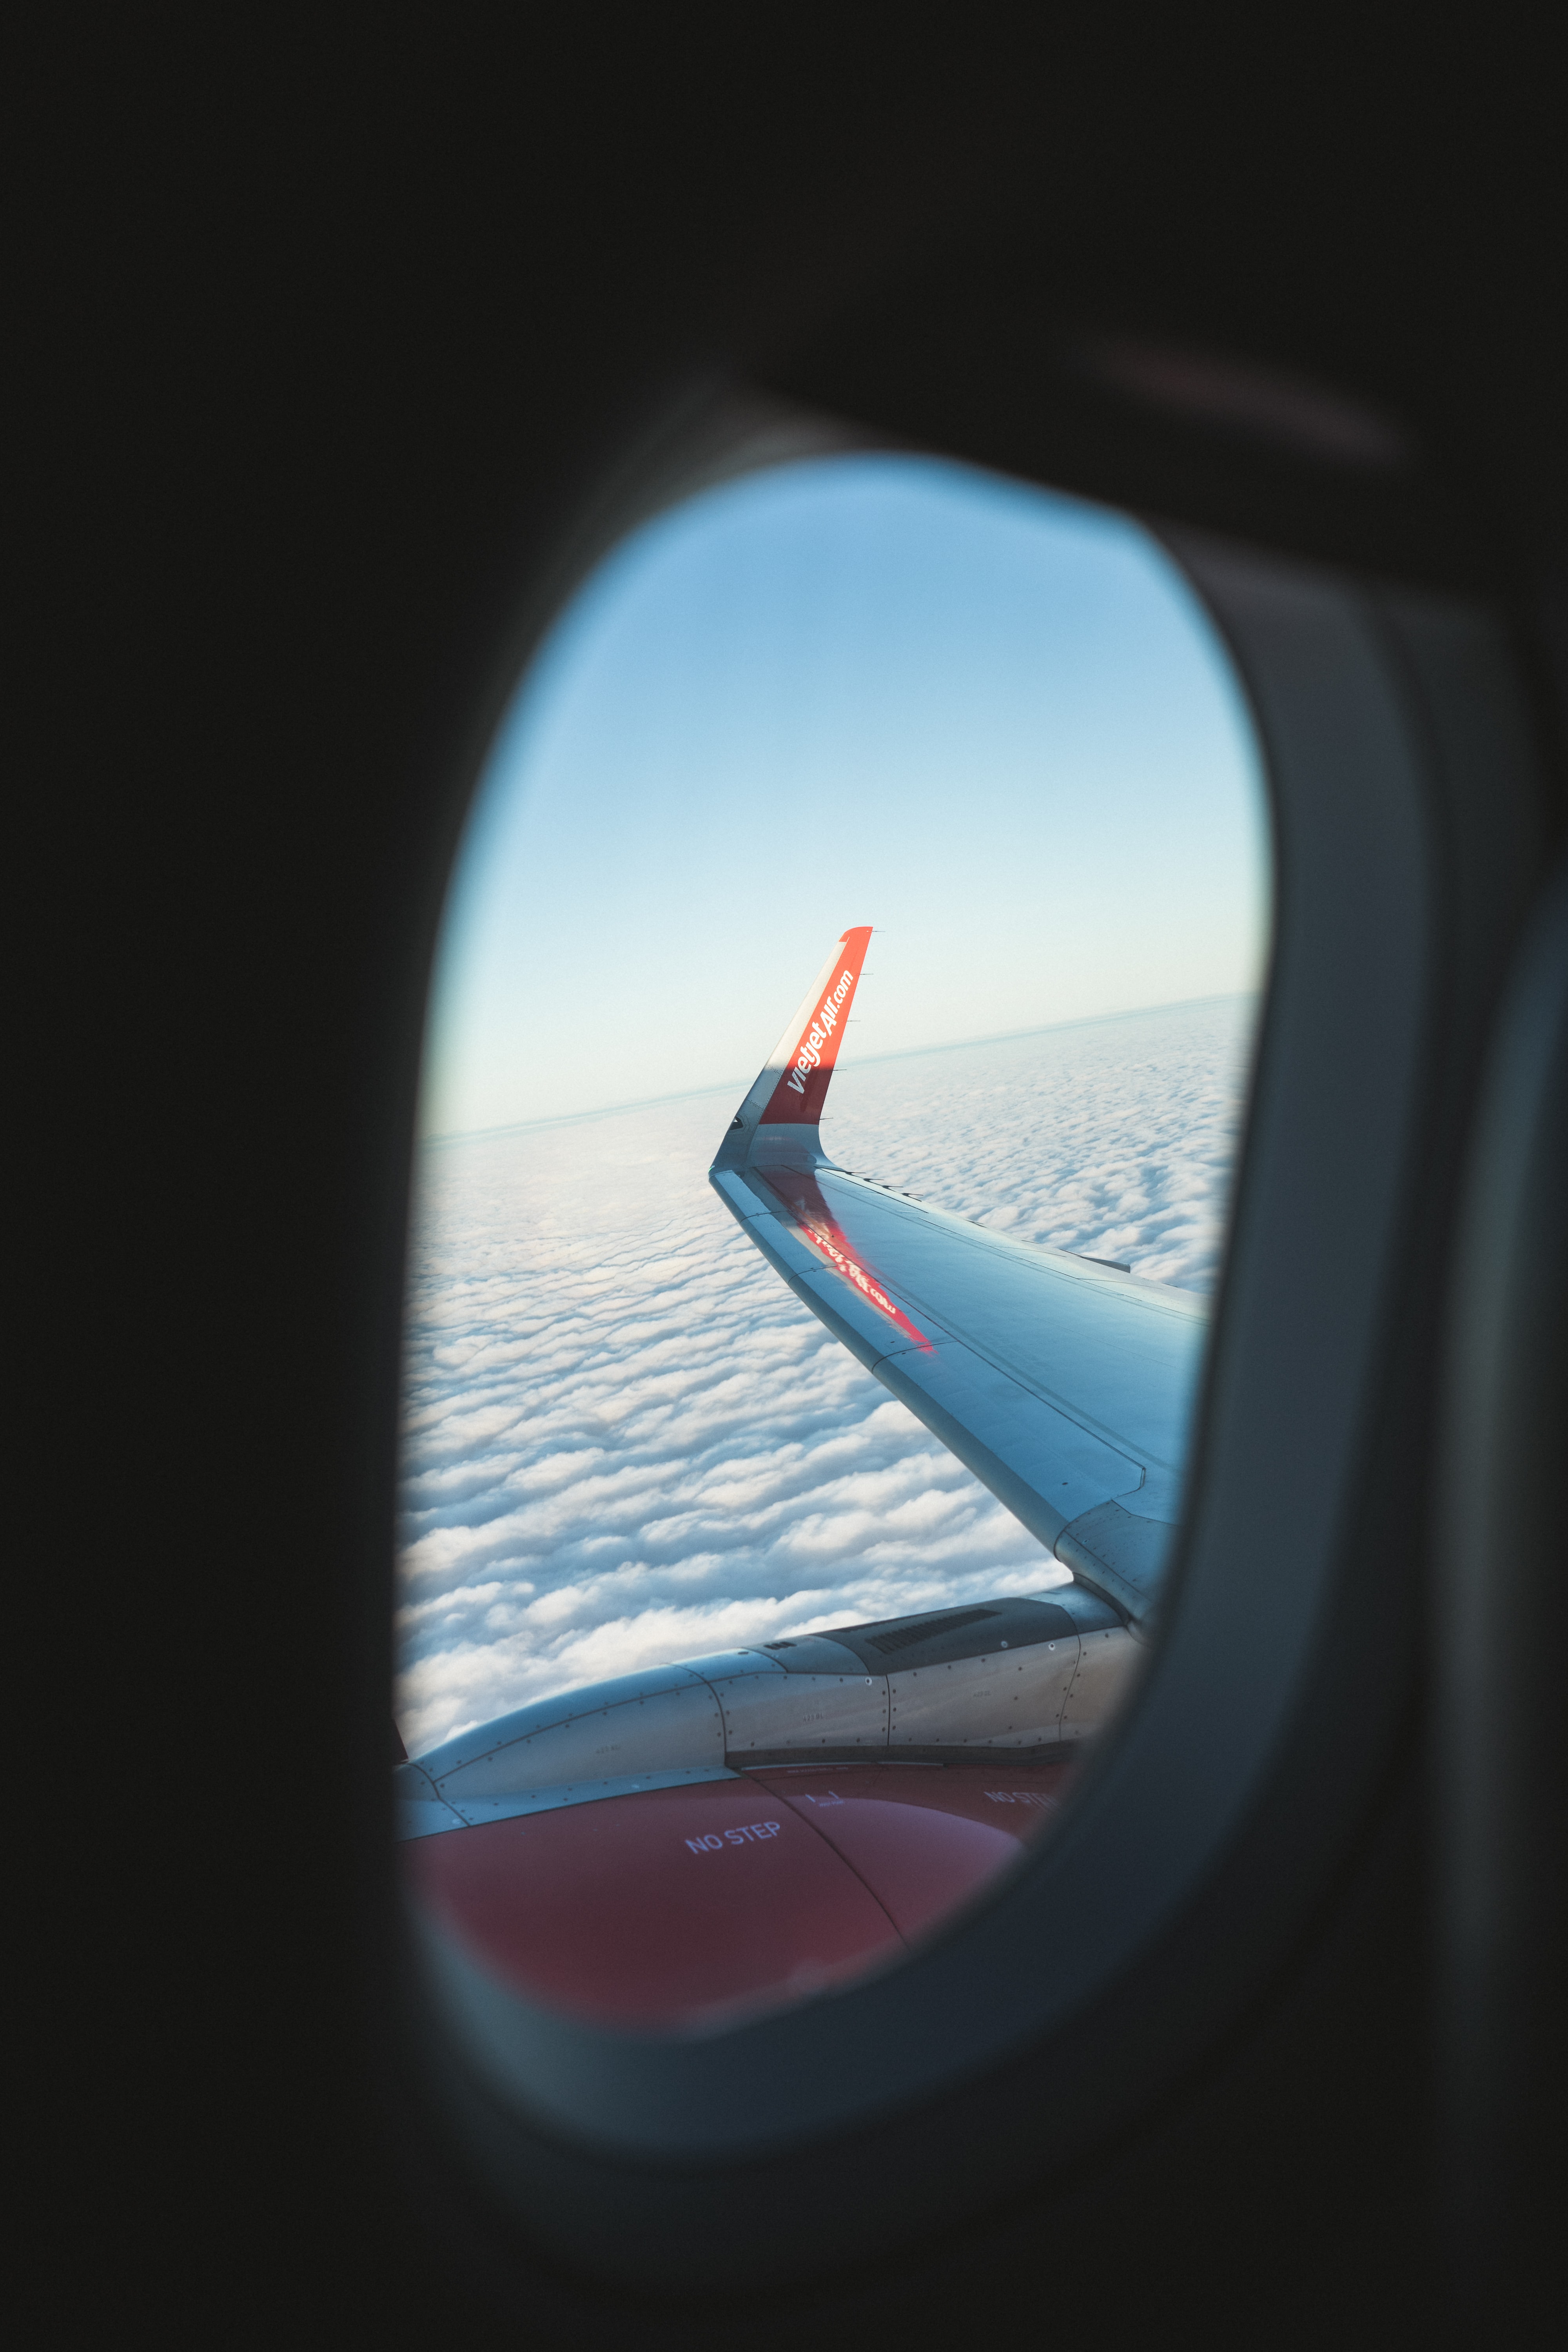 Mobile wallpaper: Porthole, View, Wing, Clouds, Window, Miscellaneous,  Airplane, Miscellanea, Plane, 155455 download the picture for free.